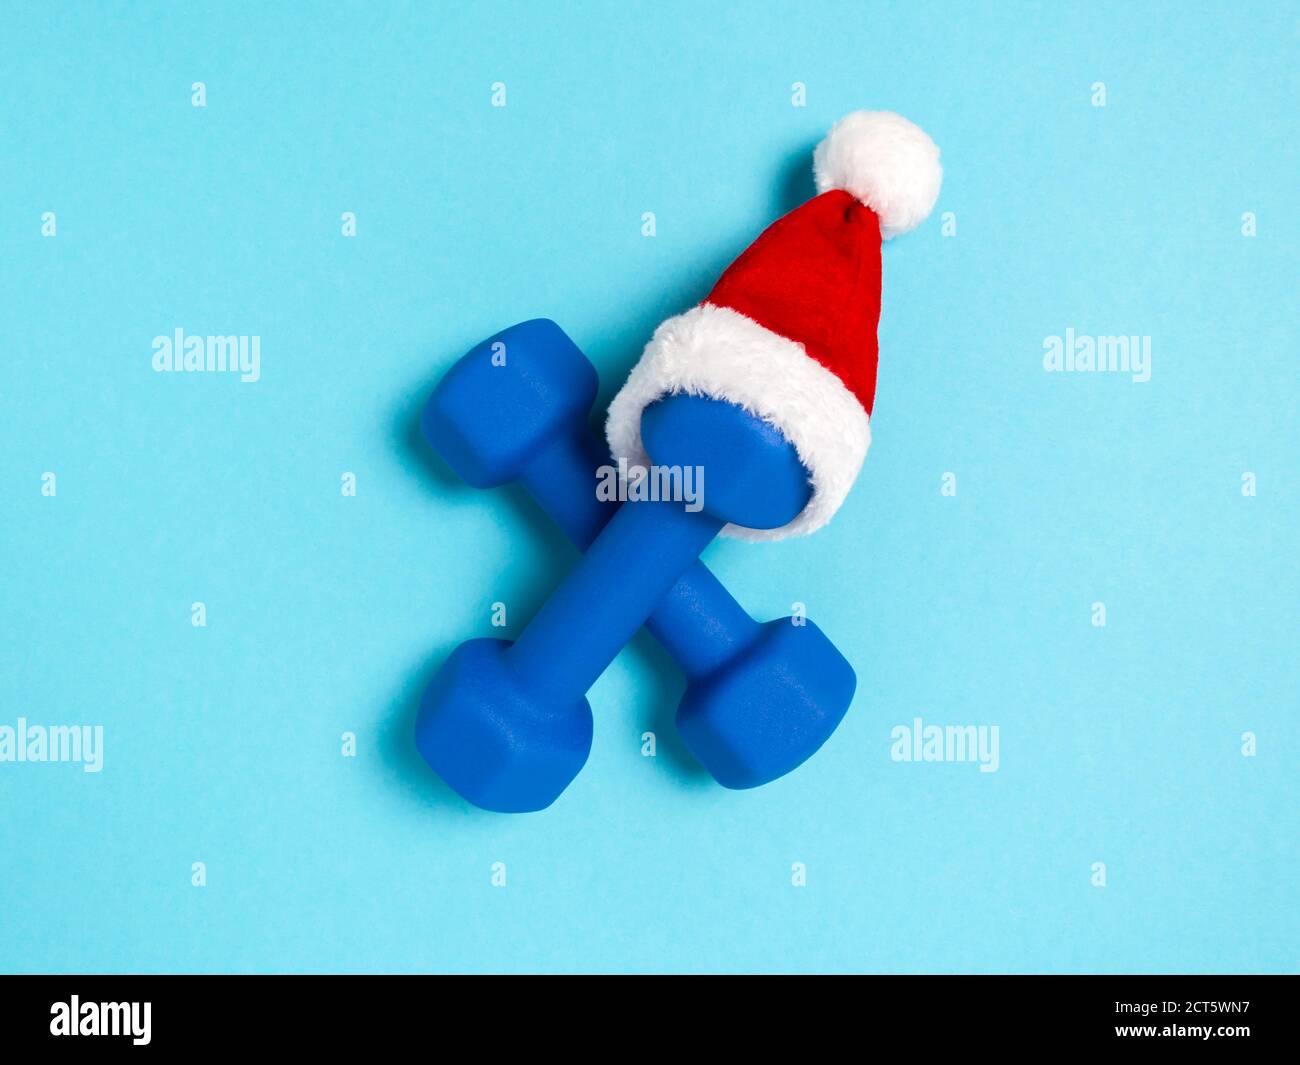 Christmas sports flat lay with dumbbells in red Santa's hat on blue background. Christmas and new year holiday concept for fitness, workout and health Stock Photo